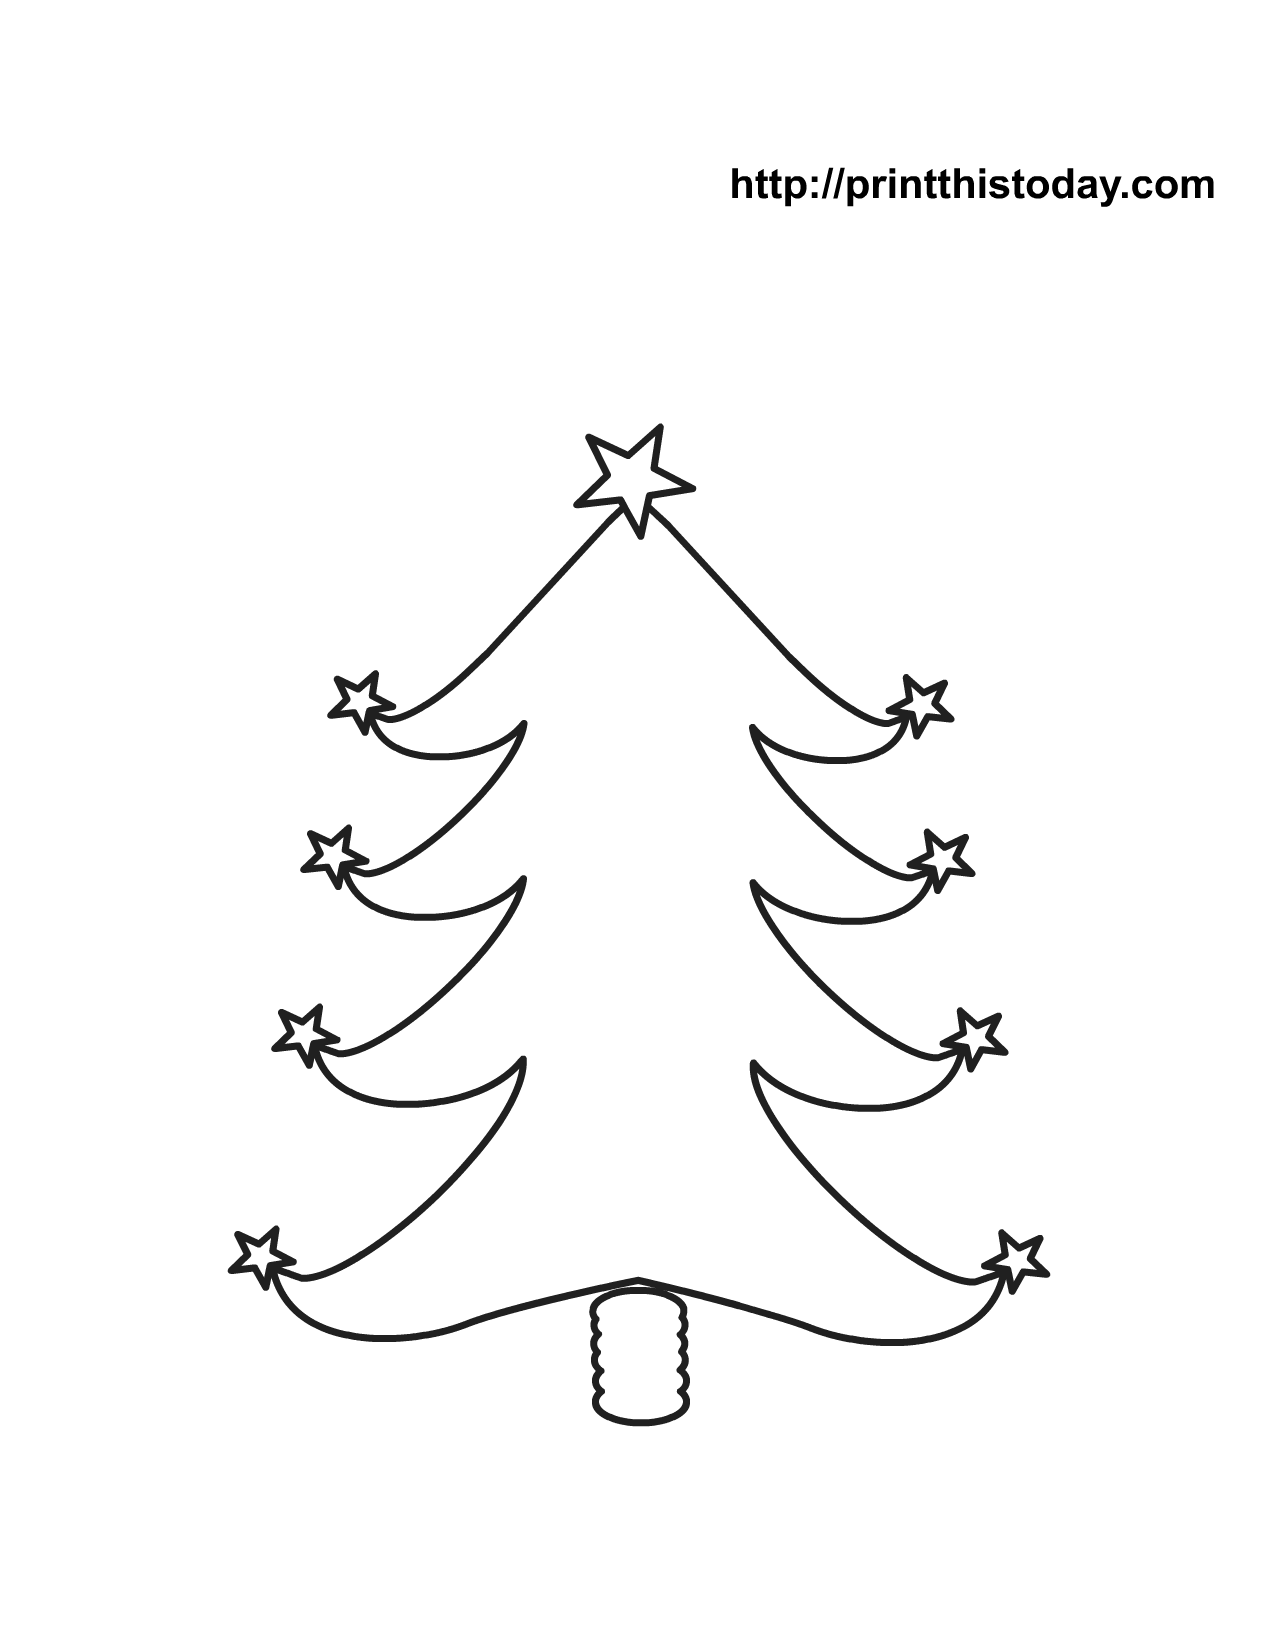  Christmas tree coloring pages – coloring book – #9